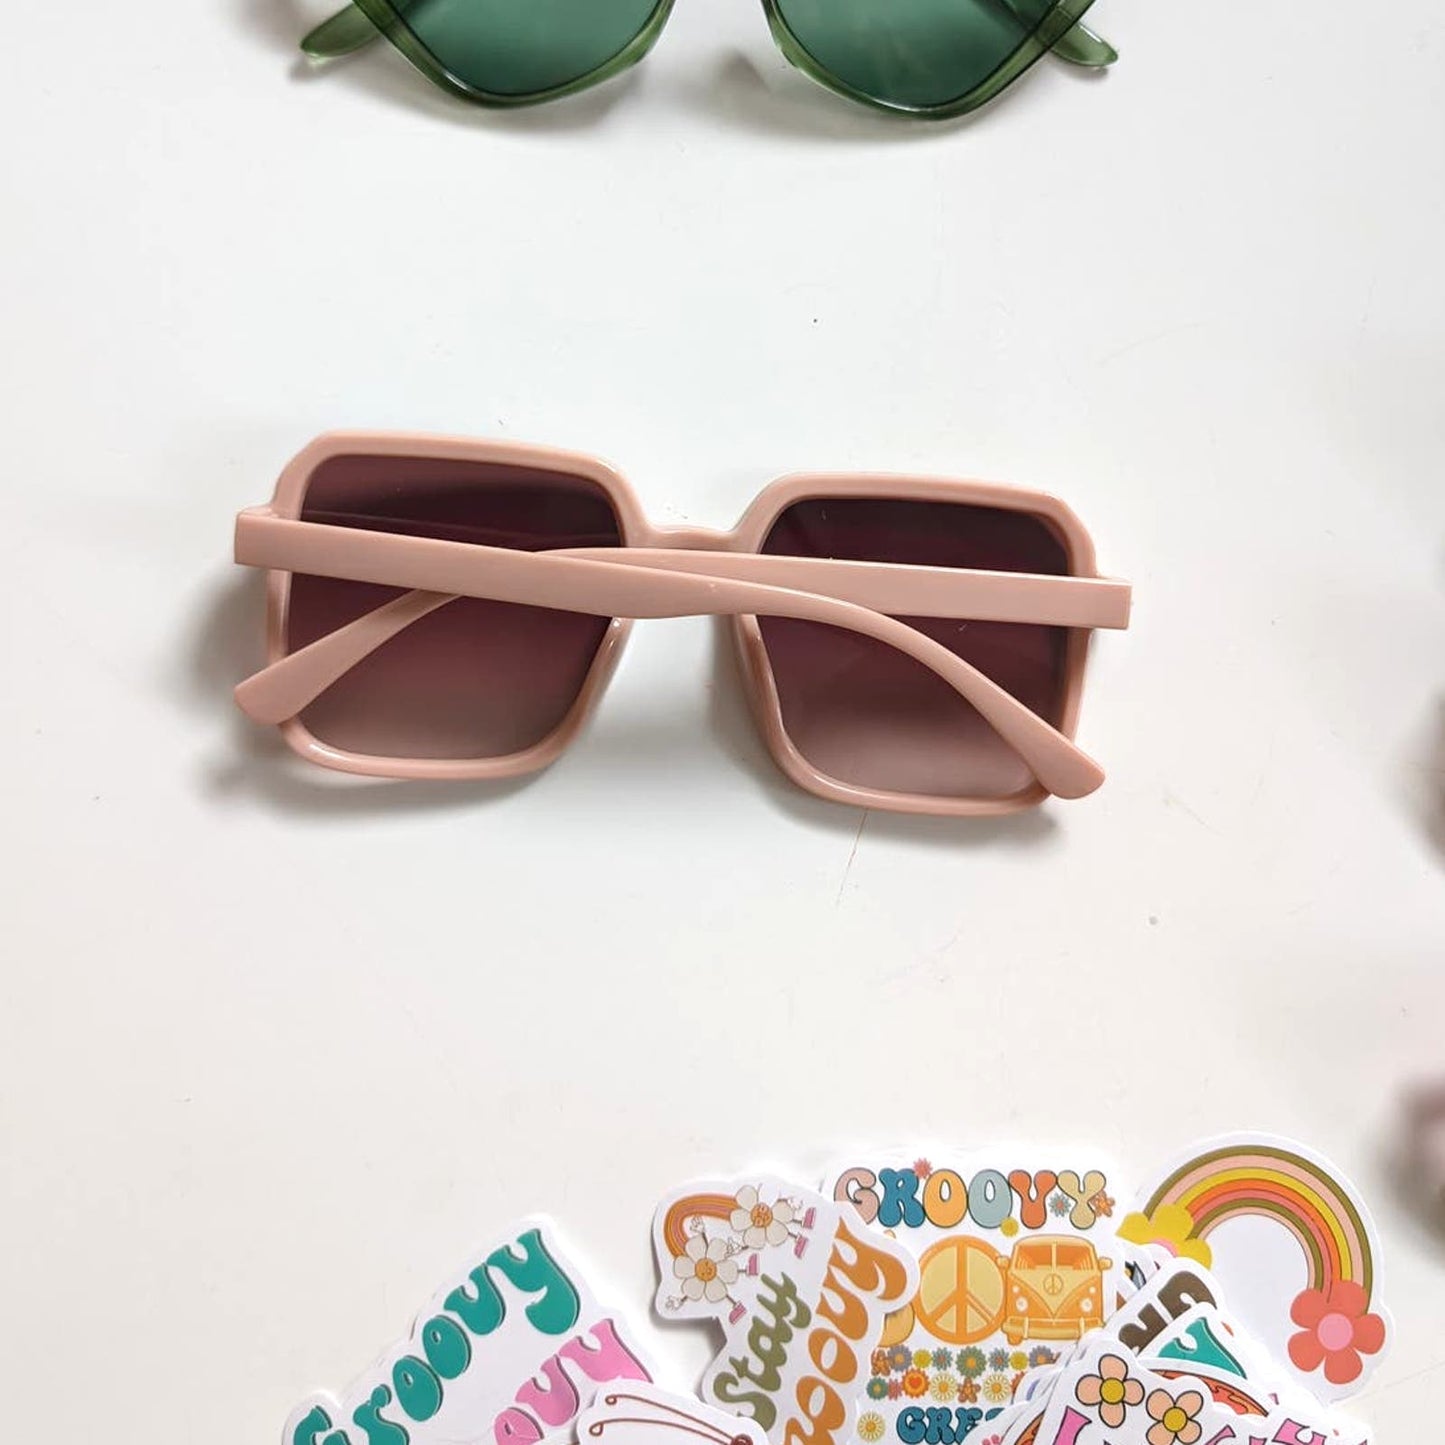 Retro Pink Square Mob Wife Festival Sunglasses Barbie Chic Tinted Sunnies Shades